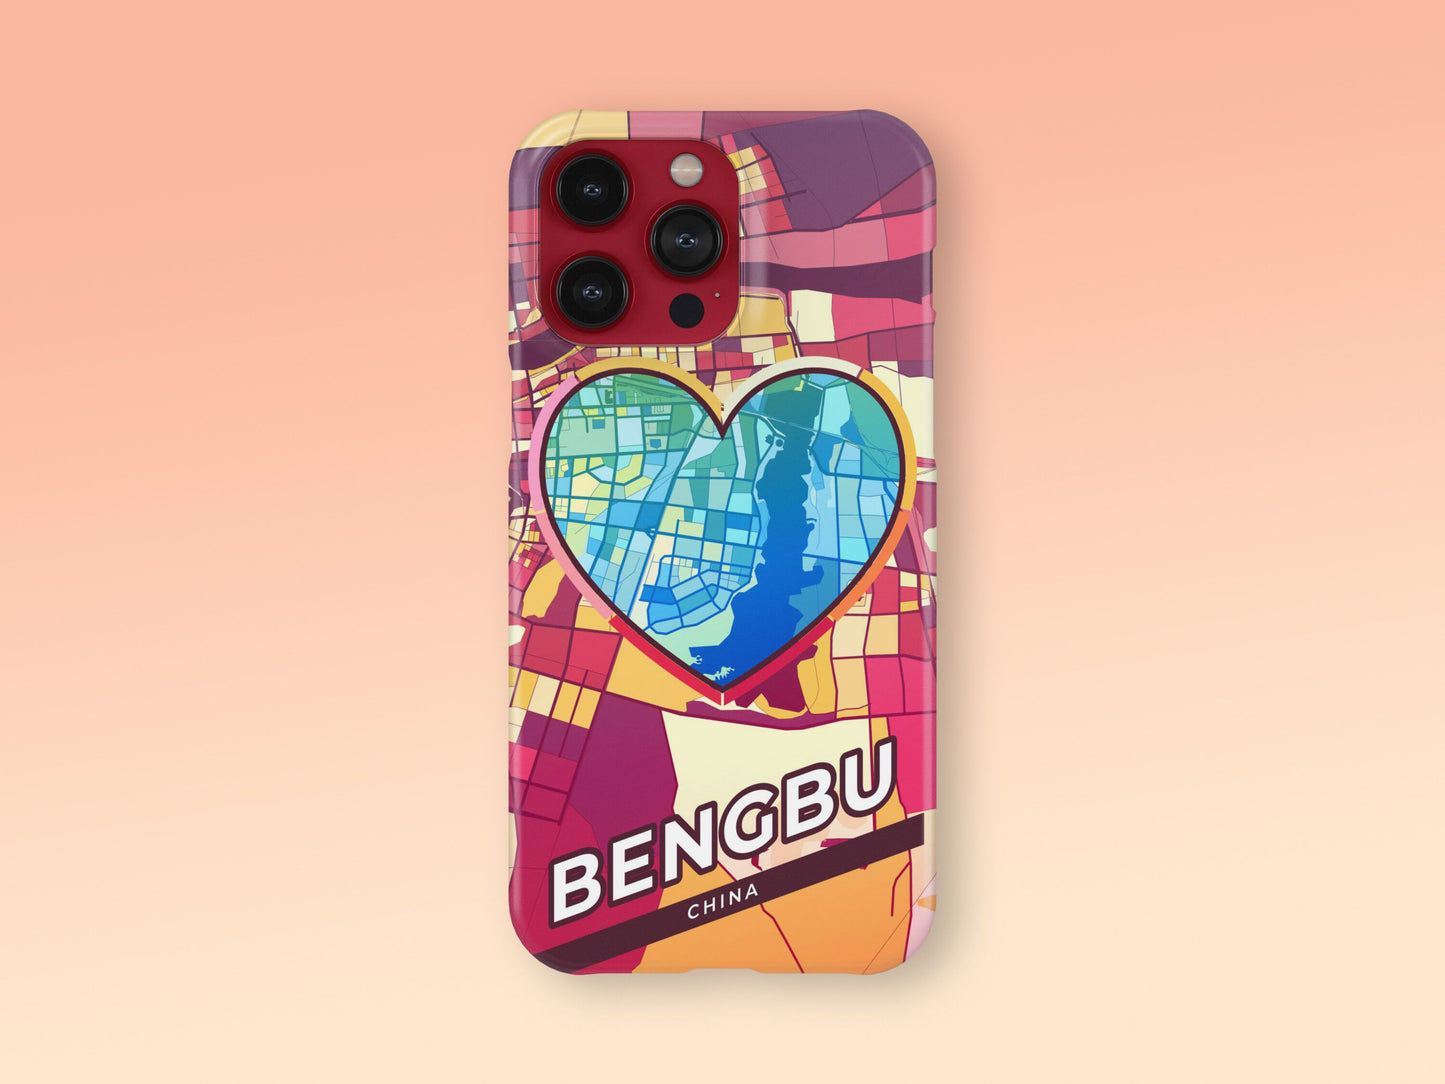 Bengbu China slim phone case with colorful icon. Birthday, wedding or housewarming gift. Couple match cases. 2